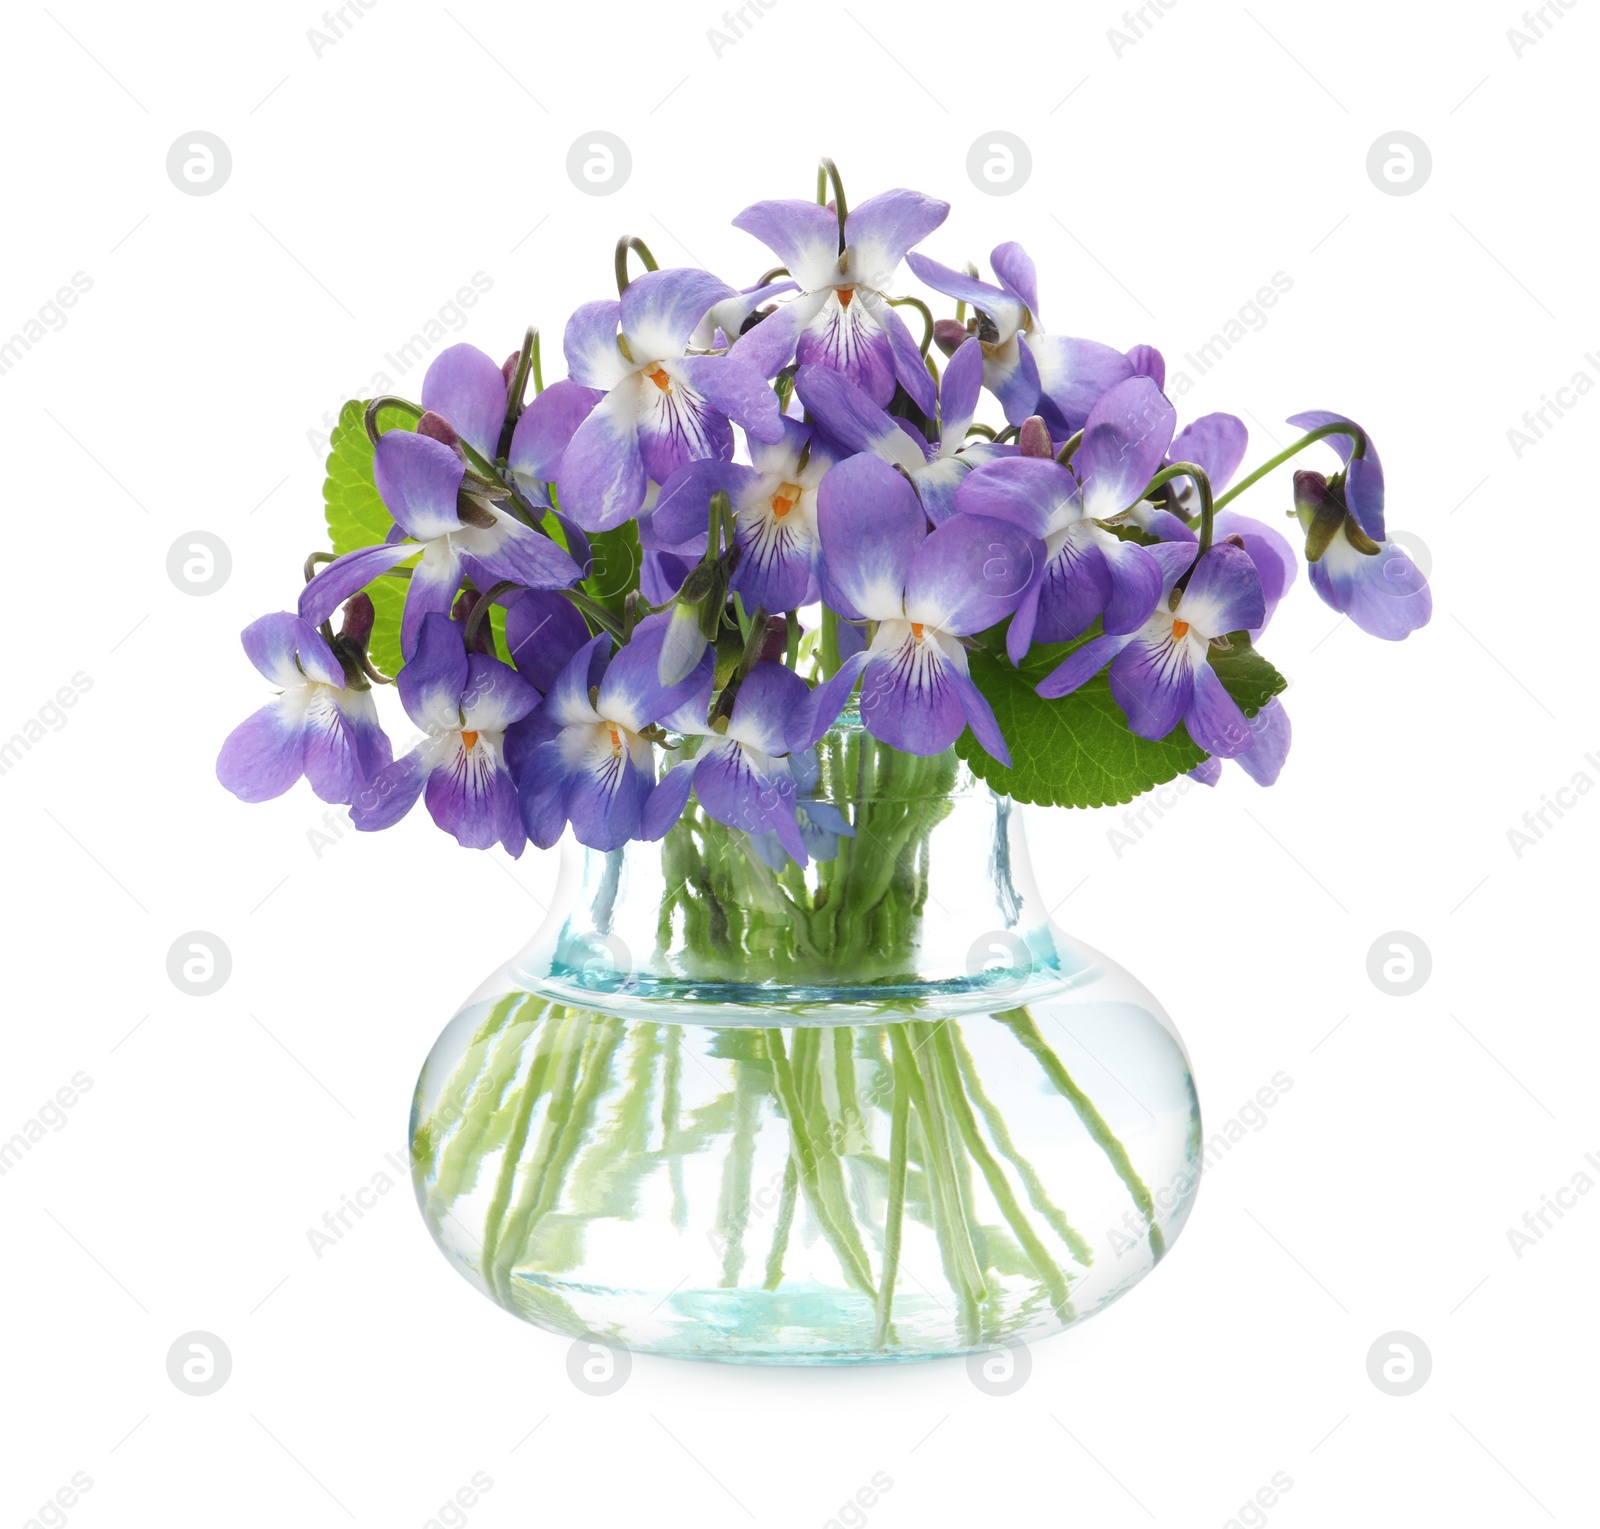 Photo of Beautiful wood violets in glass vase on white background. Spring flowers